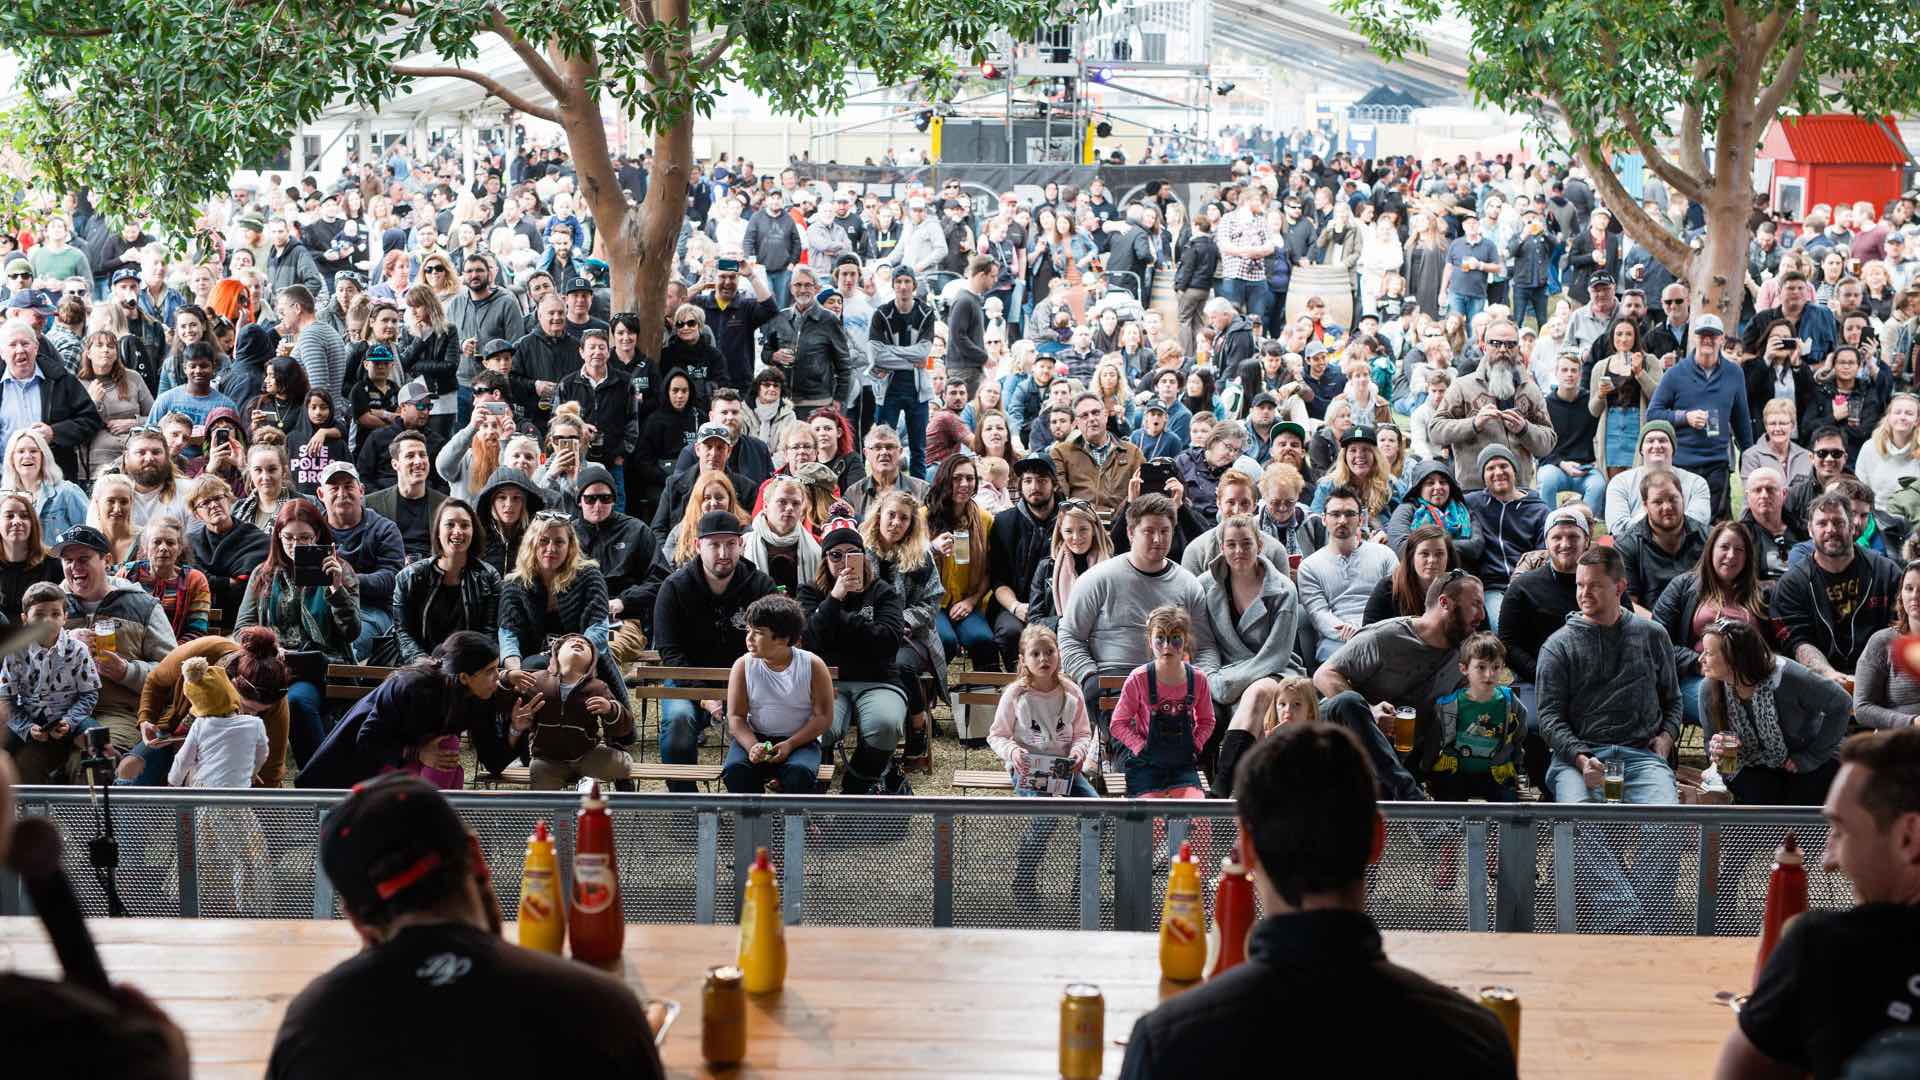 Adelaide's Beer and BBQ Festival Is Coming to Sydney for the First Time